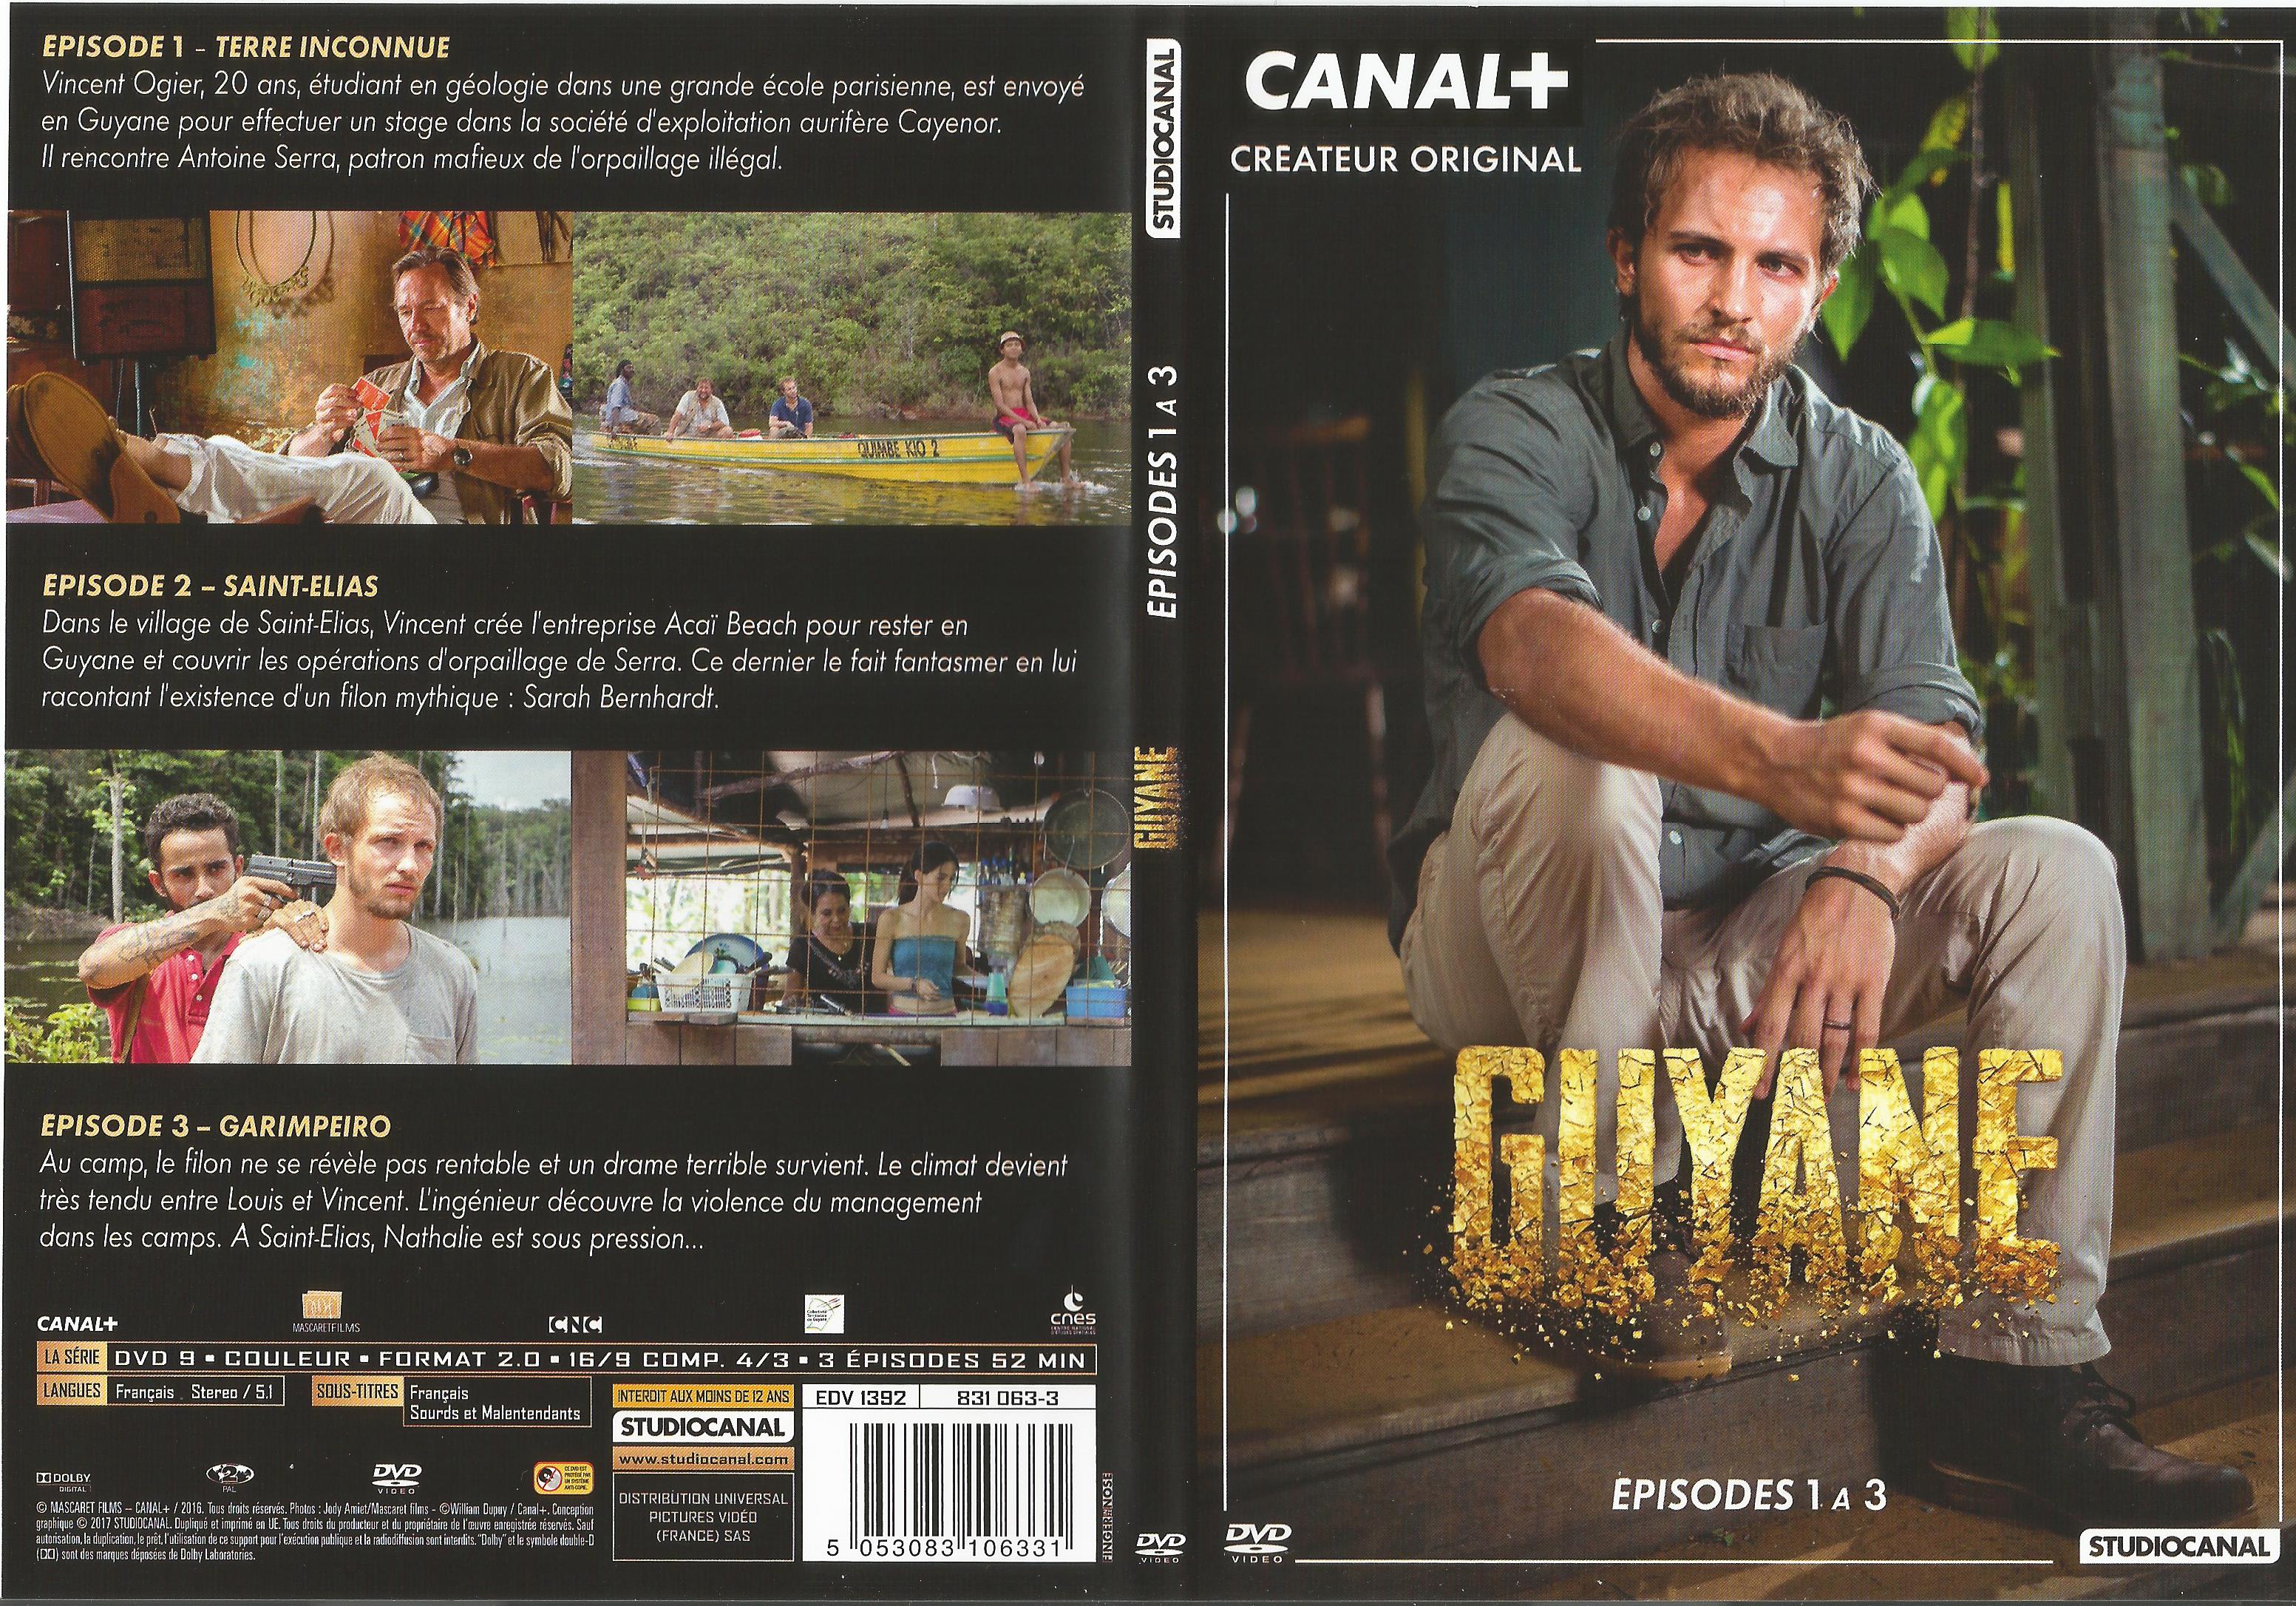 Jaquette DVD Guyane Ep 1-3